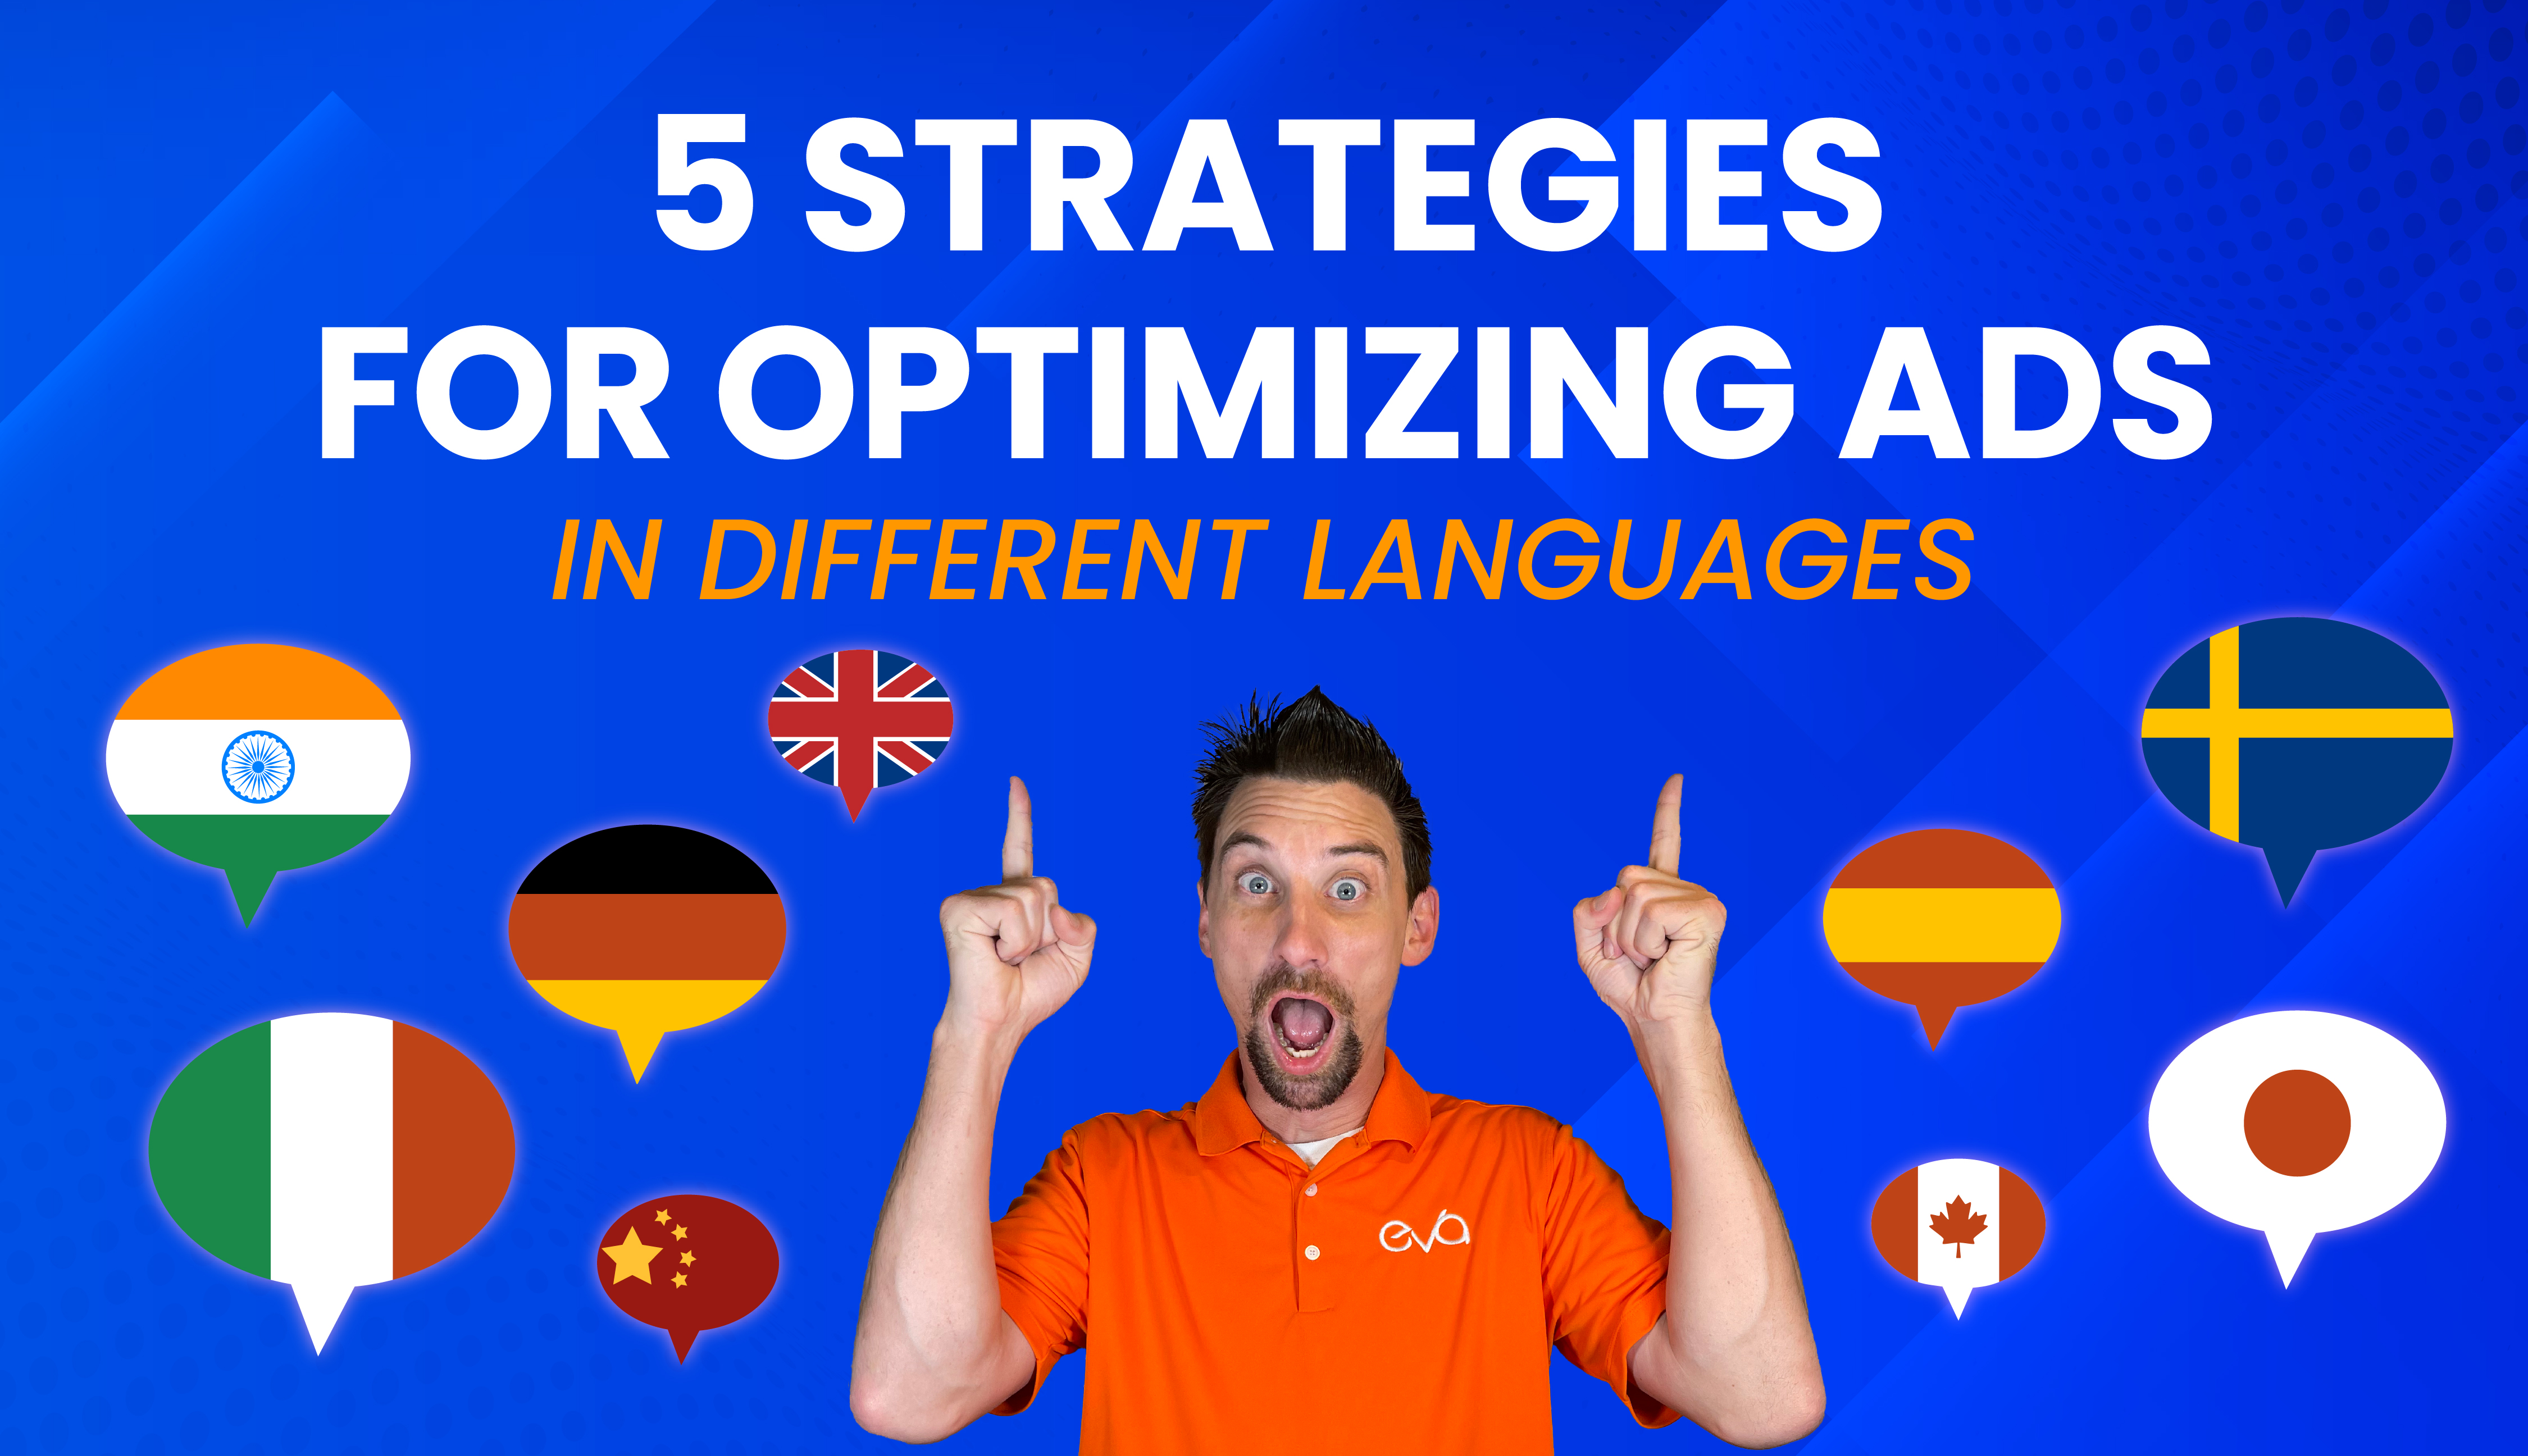 5 Strategies For Optimizing Ads In Different Languages